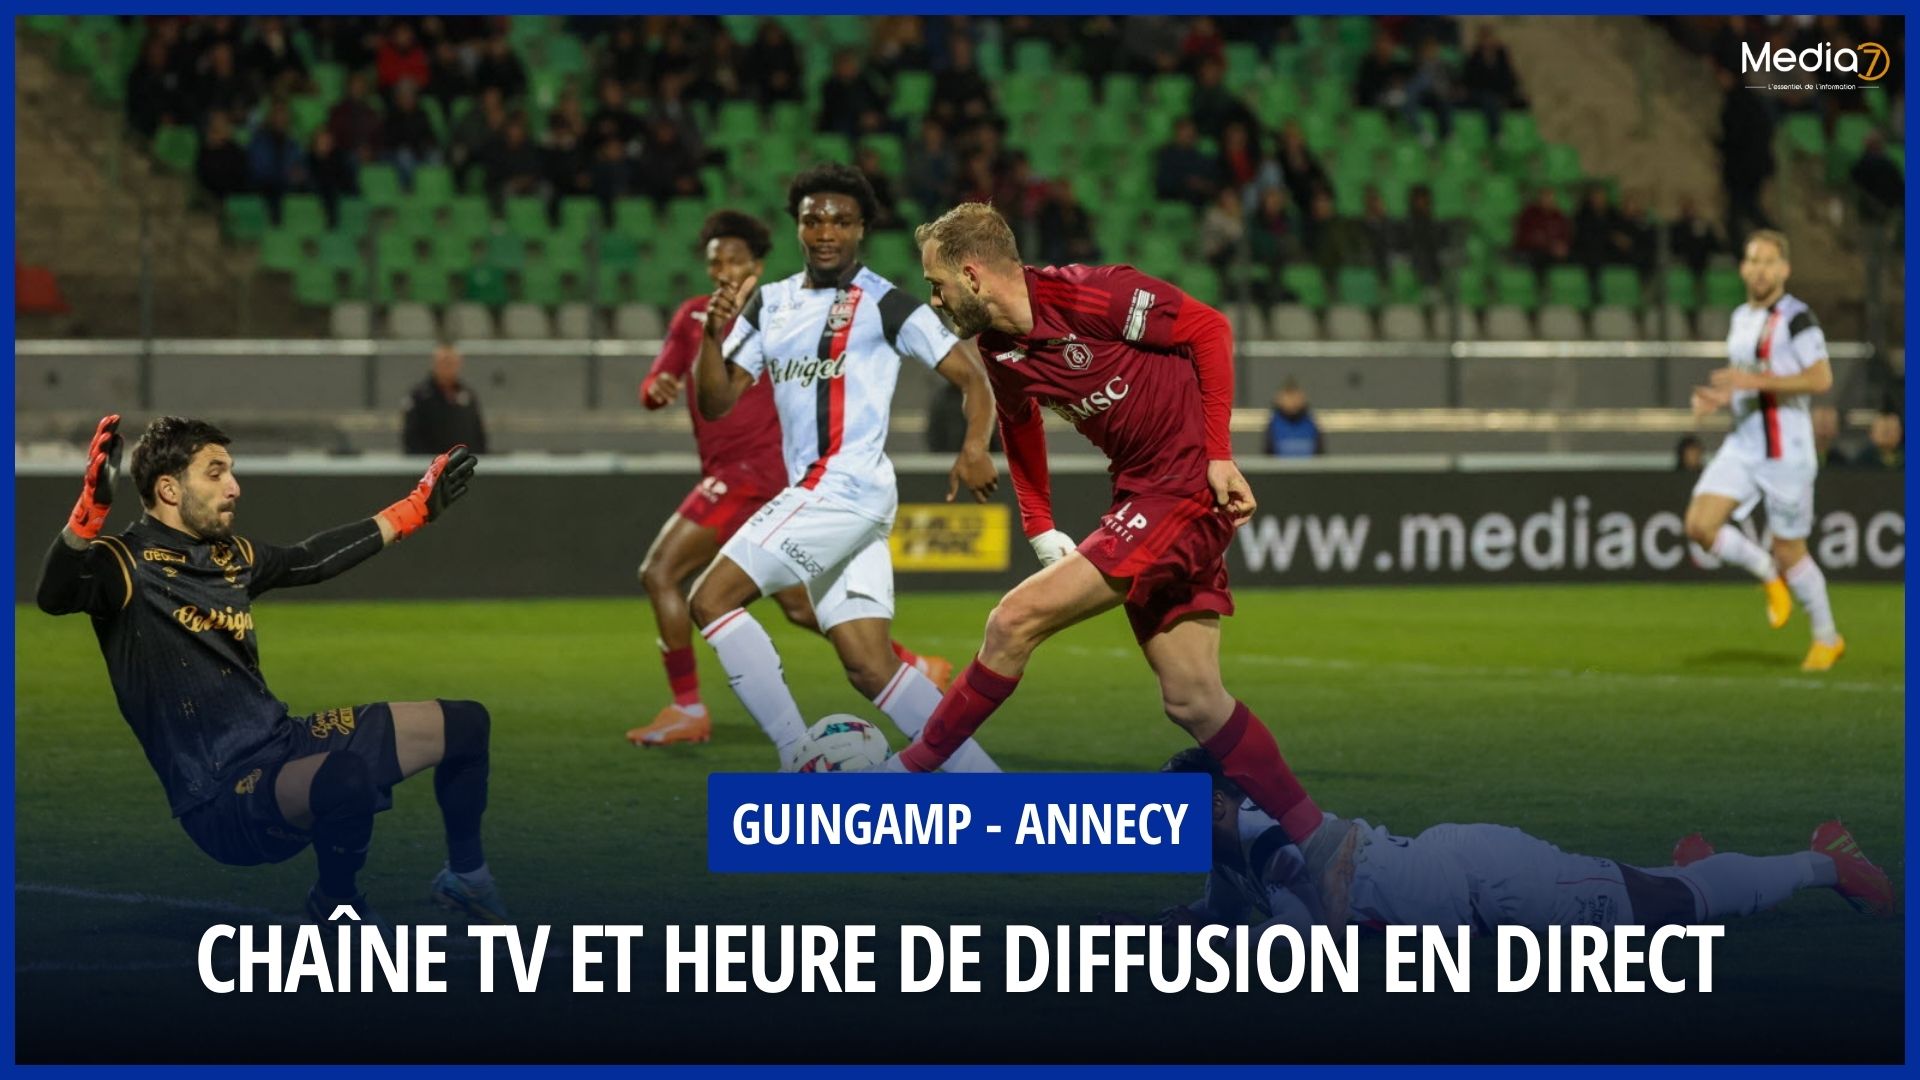 Guingamp - Annecy